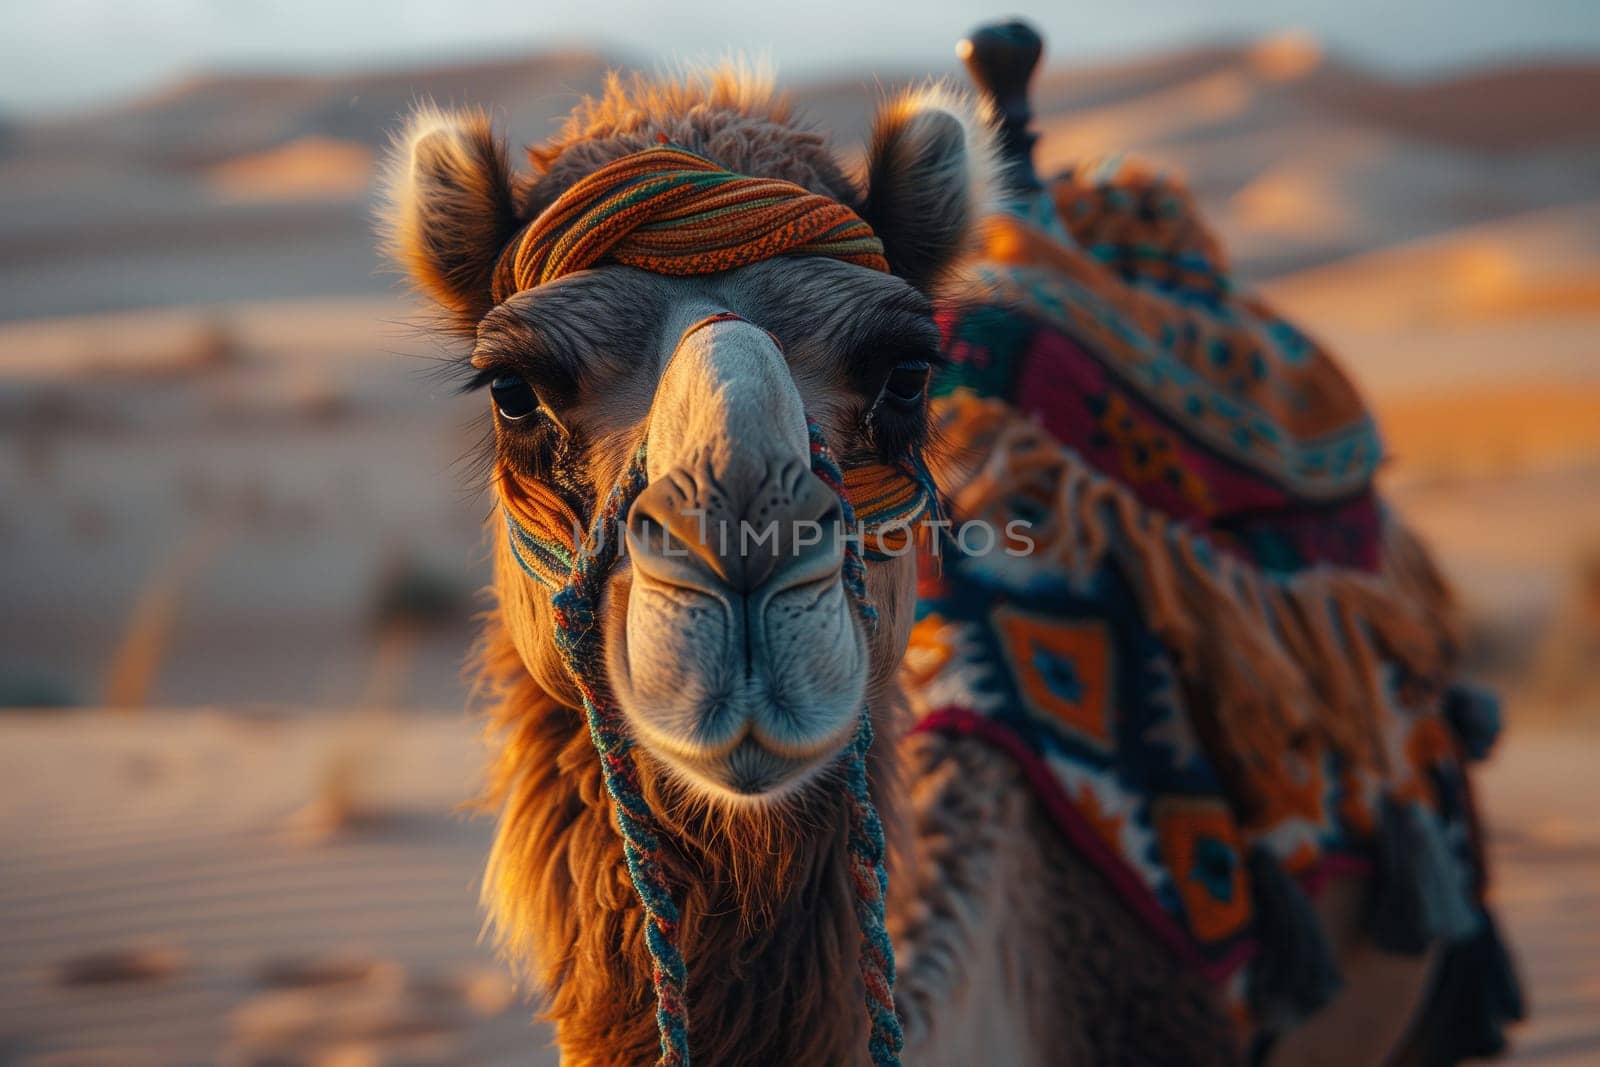 A closeup of a camels snout in the desert, showcasing this working animals role as a pack animal for travel in aeolian landscapes. Camels are terrestrial livestock and camelids